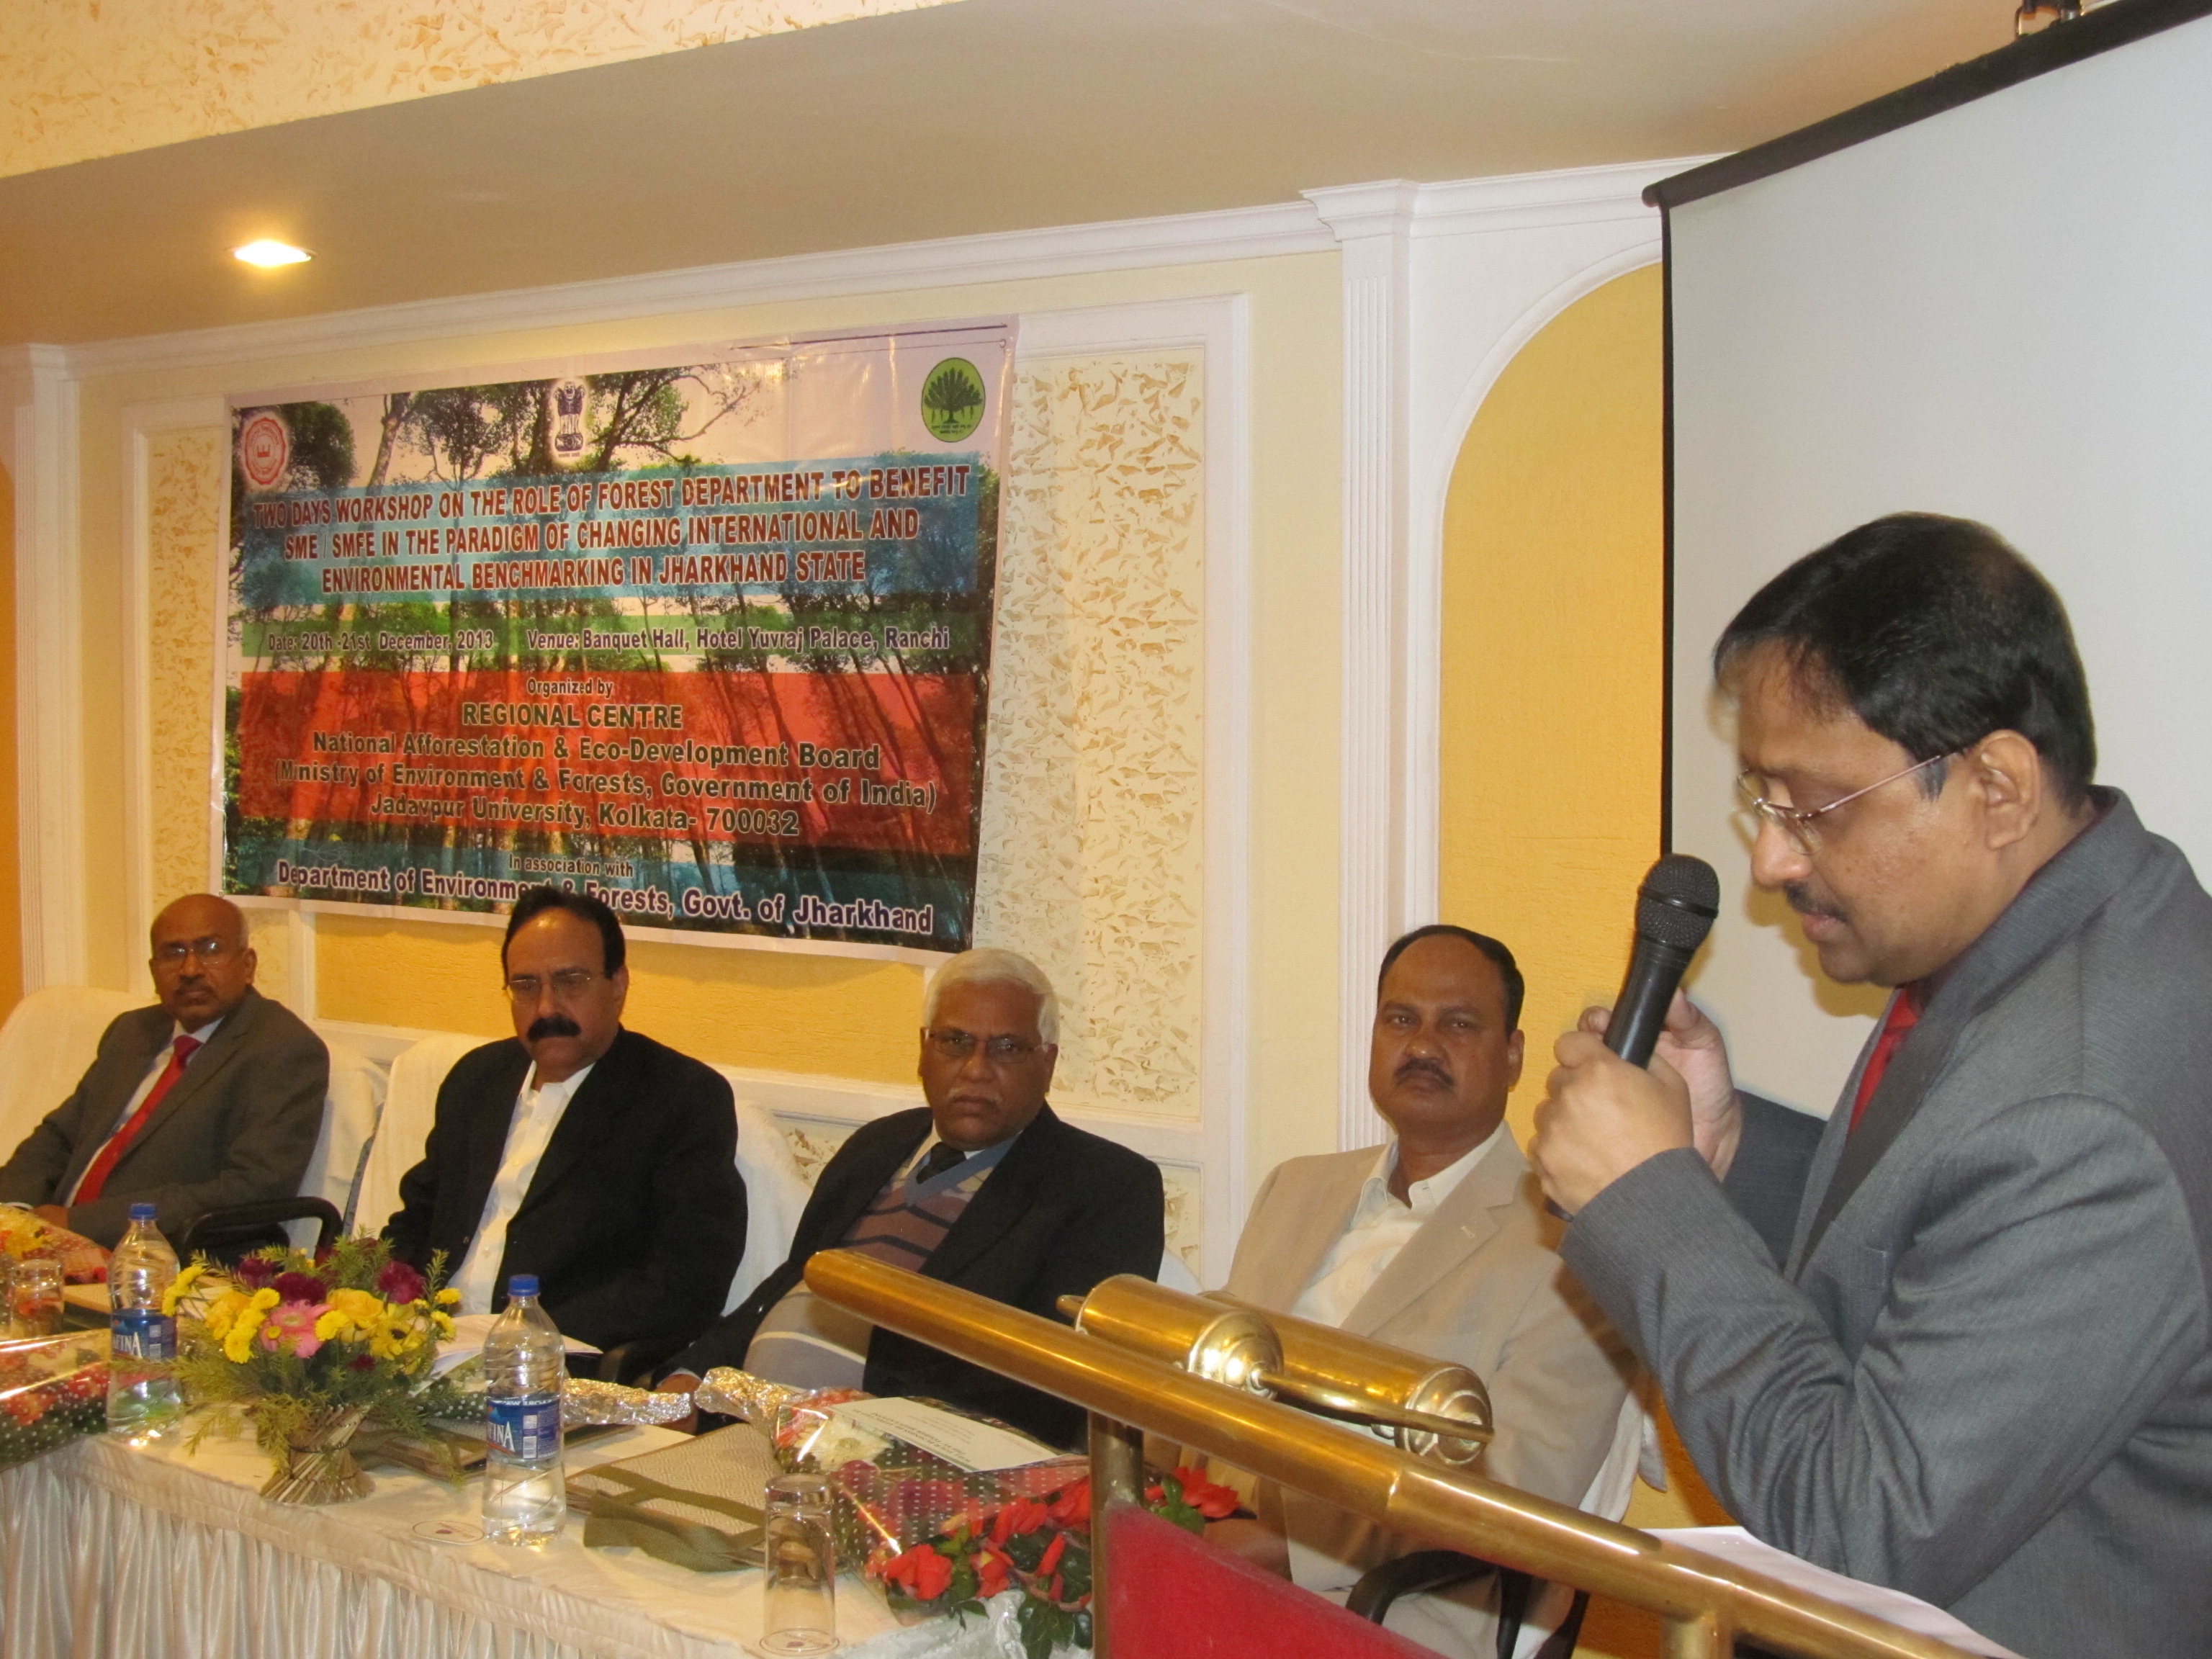 prof-asis-mazumdar-and-other-dignitaries-in-the-workshop-at-ranchi-jharkhand